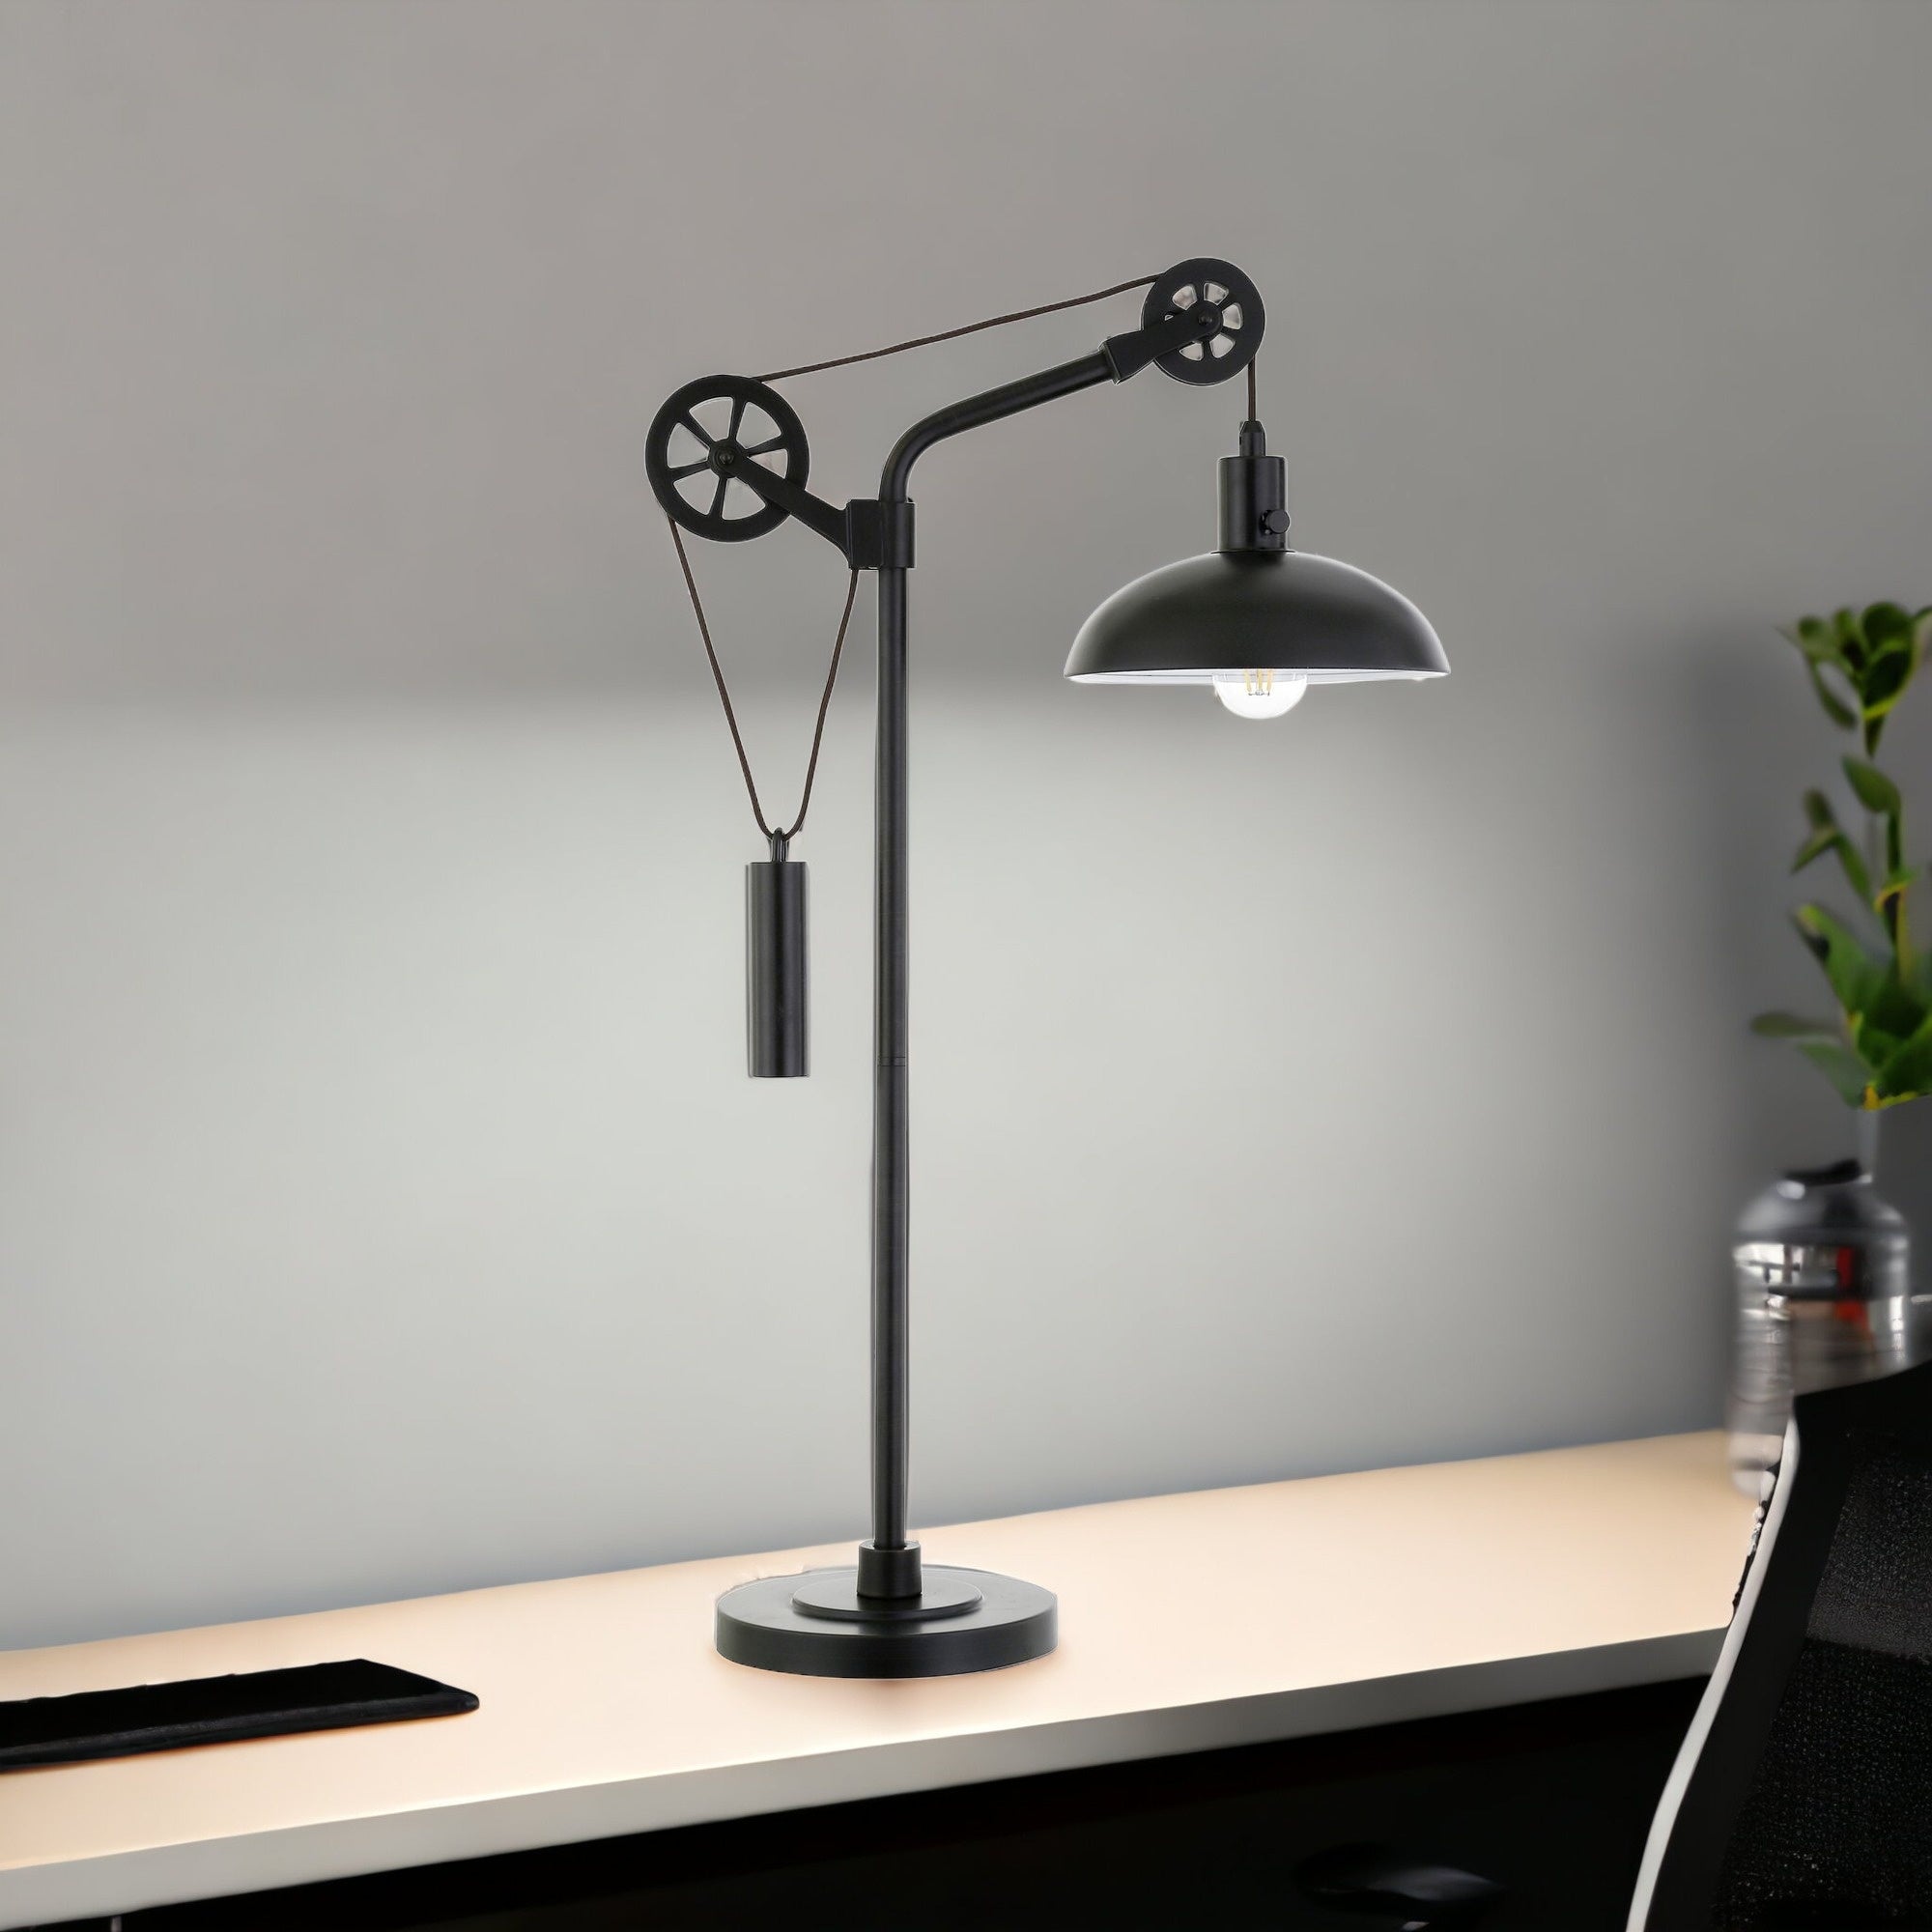 33" Black Metal Adjustable Desk Table Lamp With Black Dome Shade